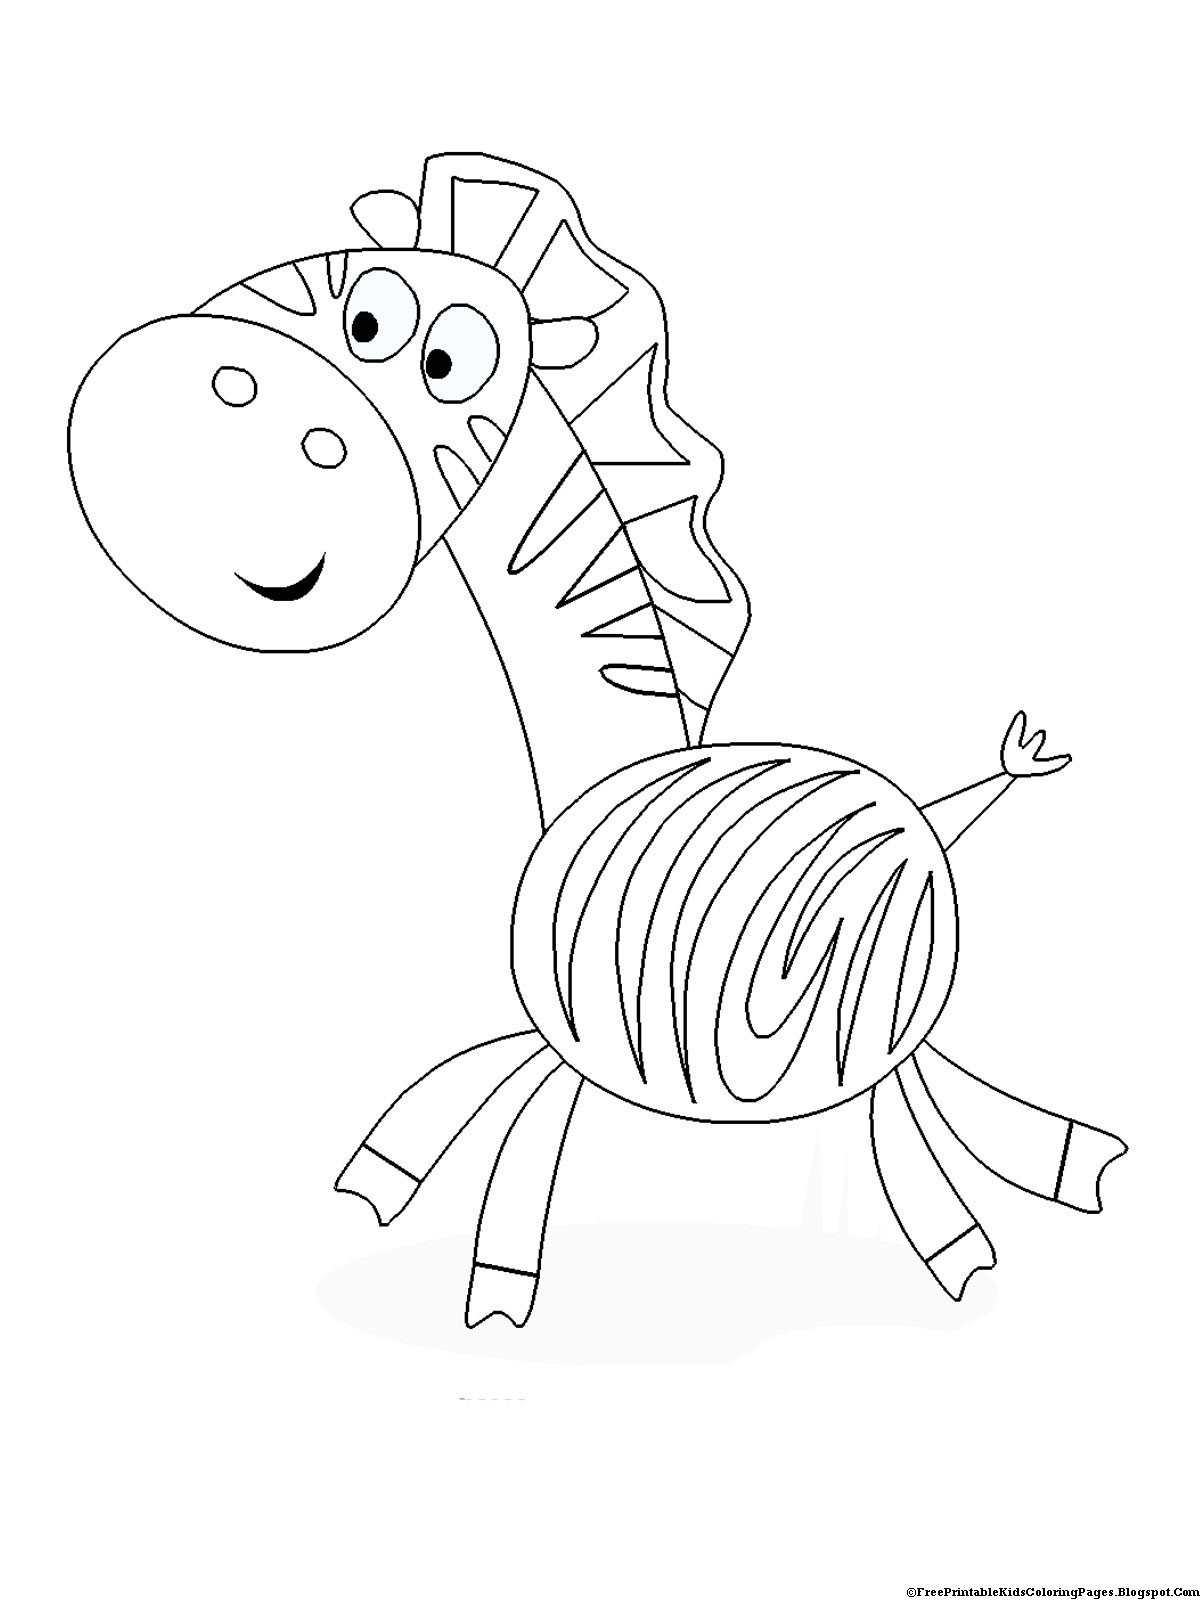 Coloring Pages For Kids To Print Out
 Zebra Coloring Pages Free Printable Kids Coloring Pages